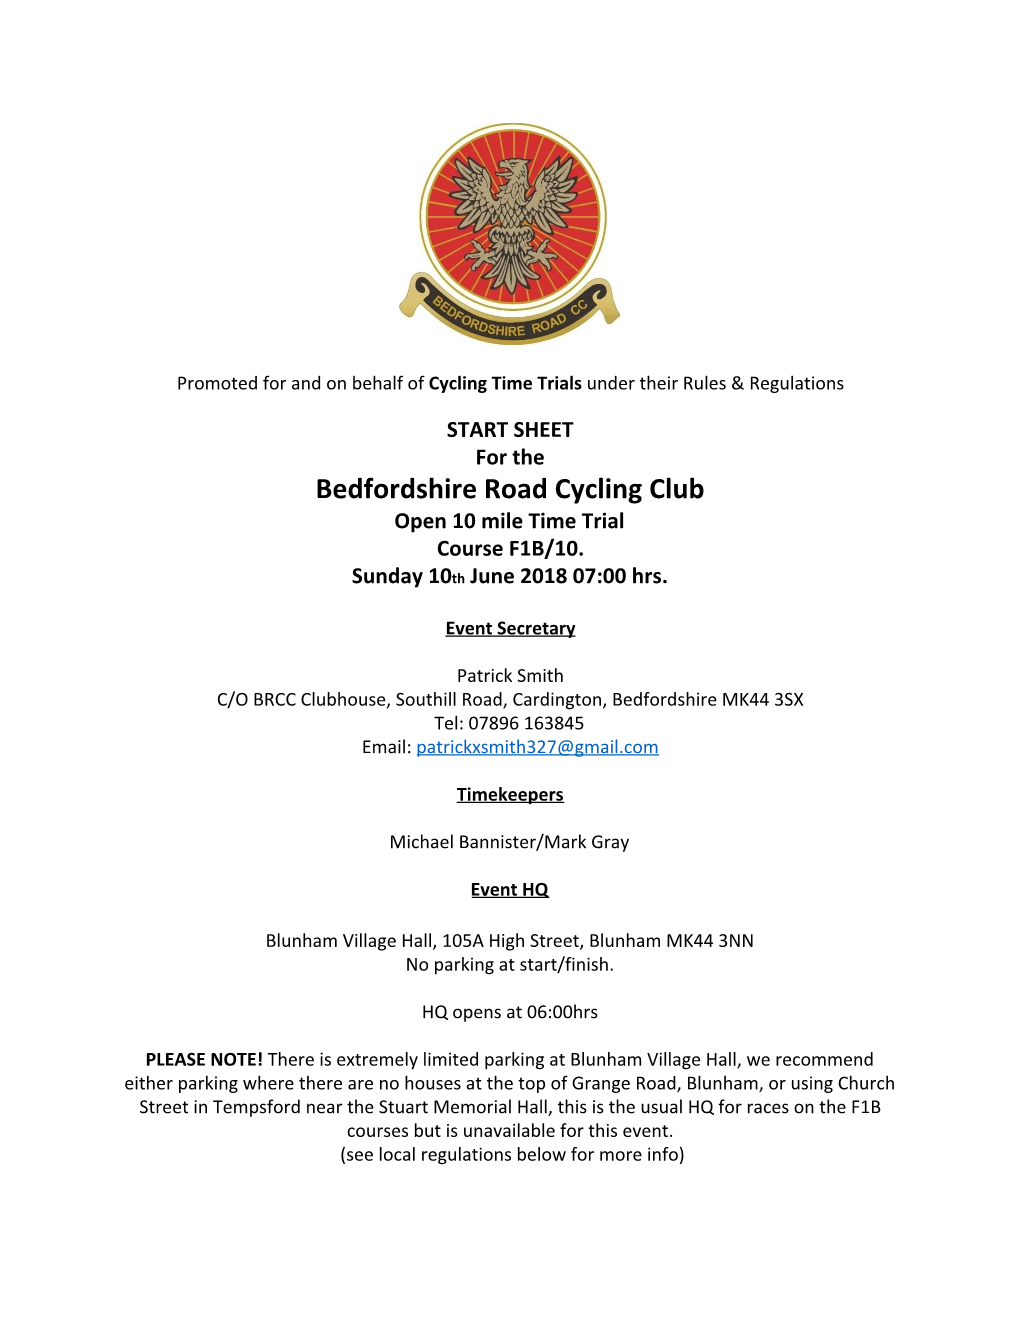 Bedfordshire Road Cycling Club Open 10 Mile Time Trial Course F1B/10